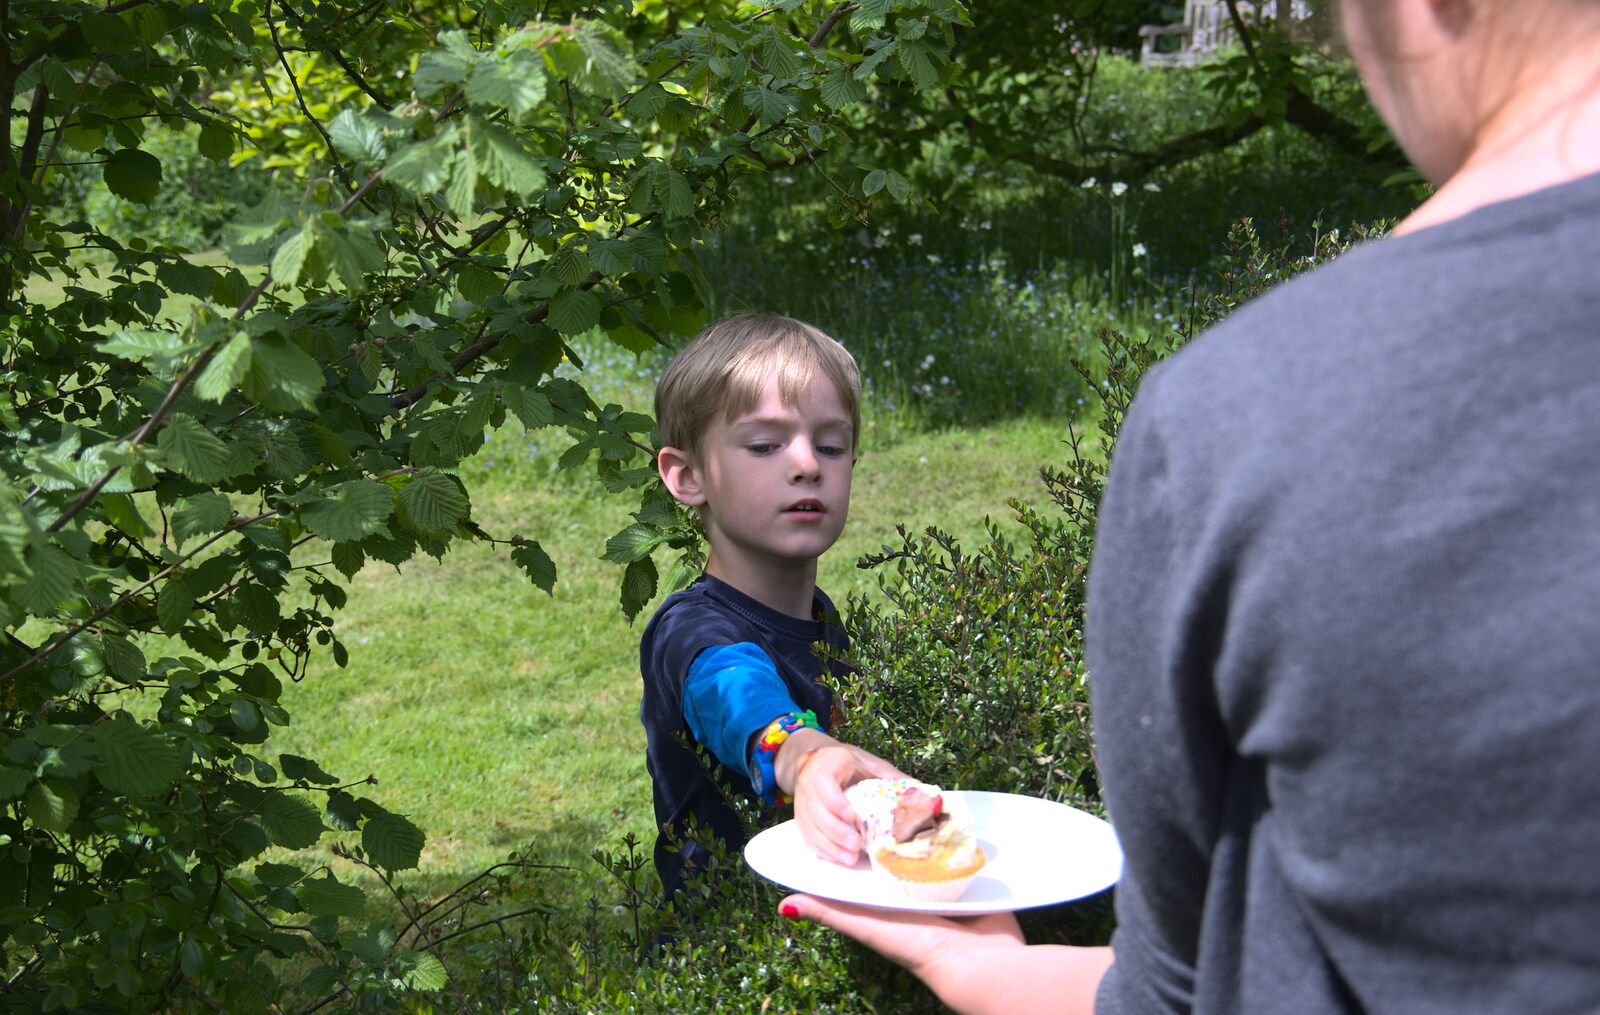 Harry appears through the hedge to claim his cake from A Right Royal Wedding at the Village Hall, Brome, Suffolk - 19th May 2018